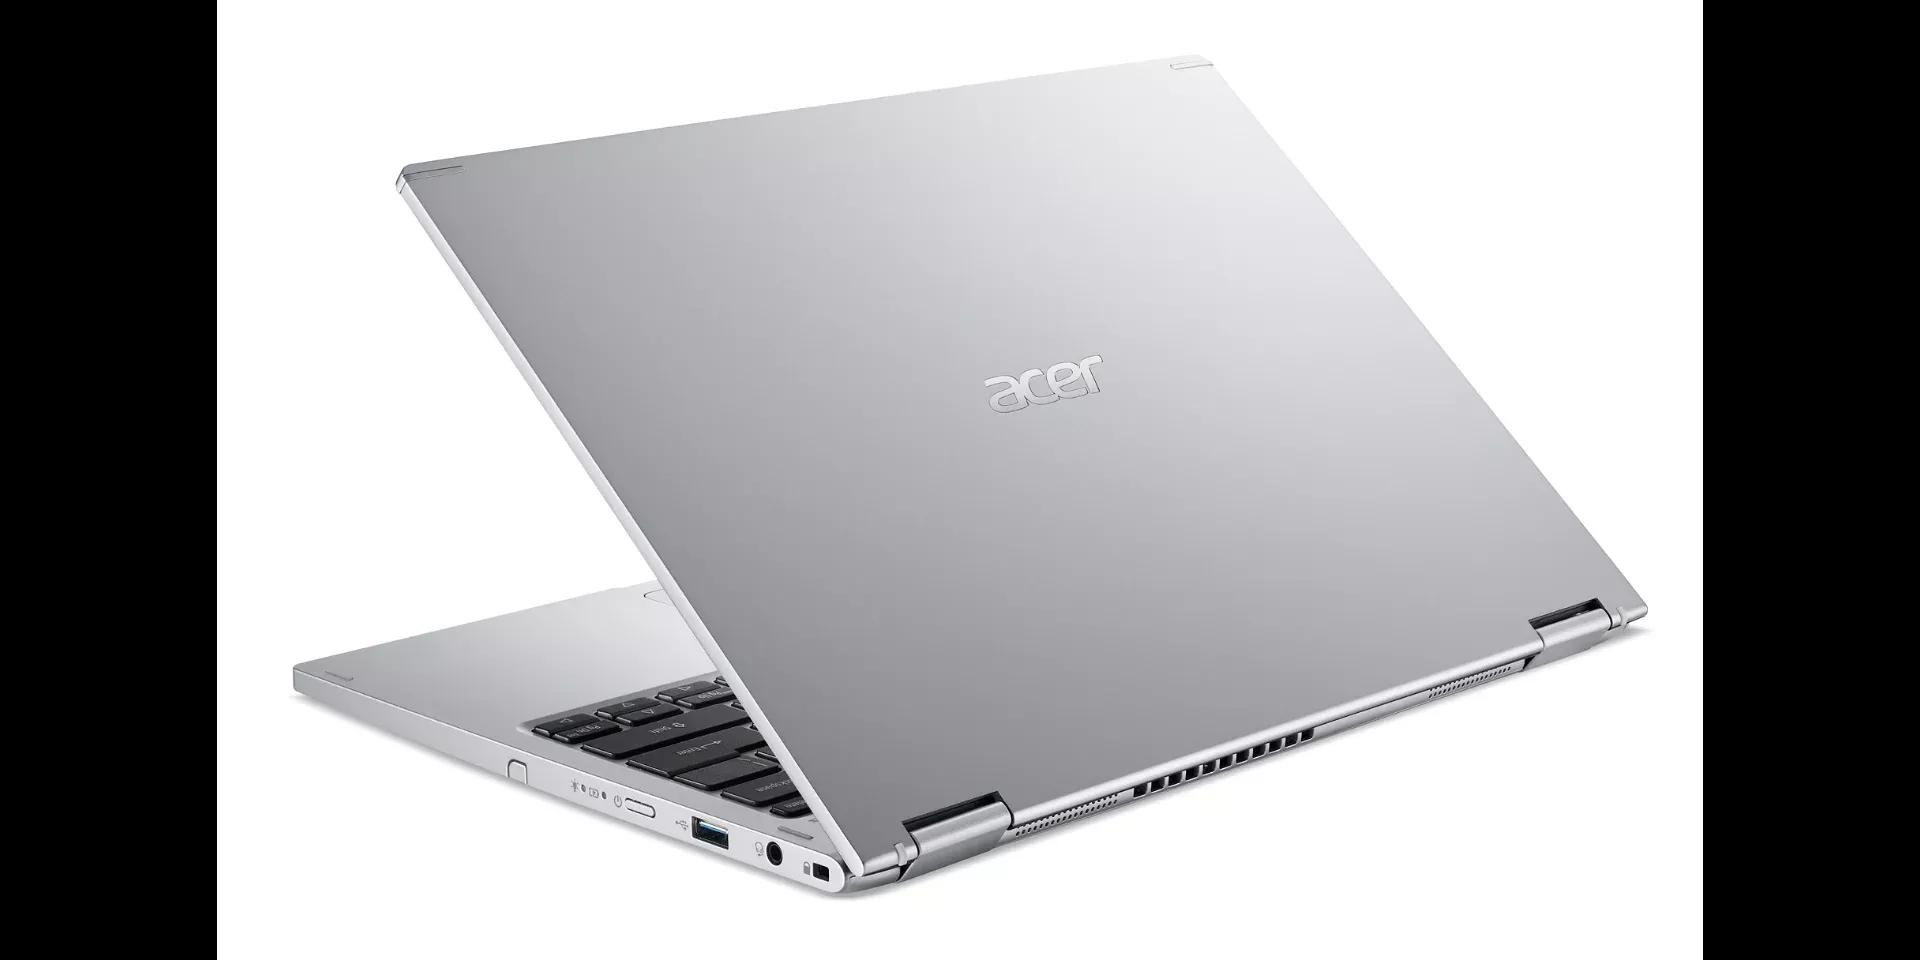 Acer Spin 3 2020 i7 10th Gen / 8GB RAM / 512GB SSD / 14" FHD 360 TouchScreen / Rechargeable Stylus